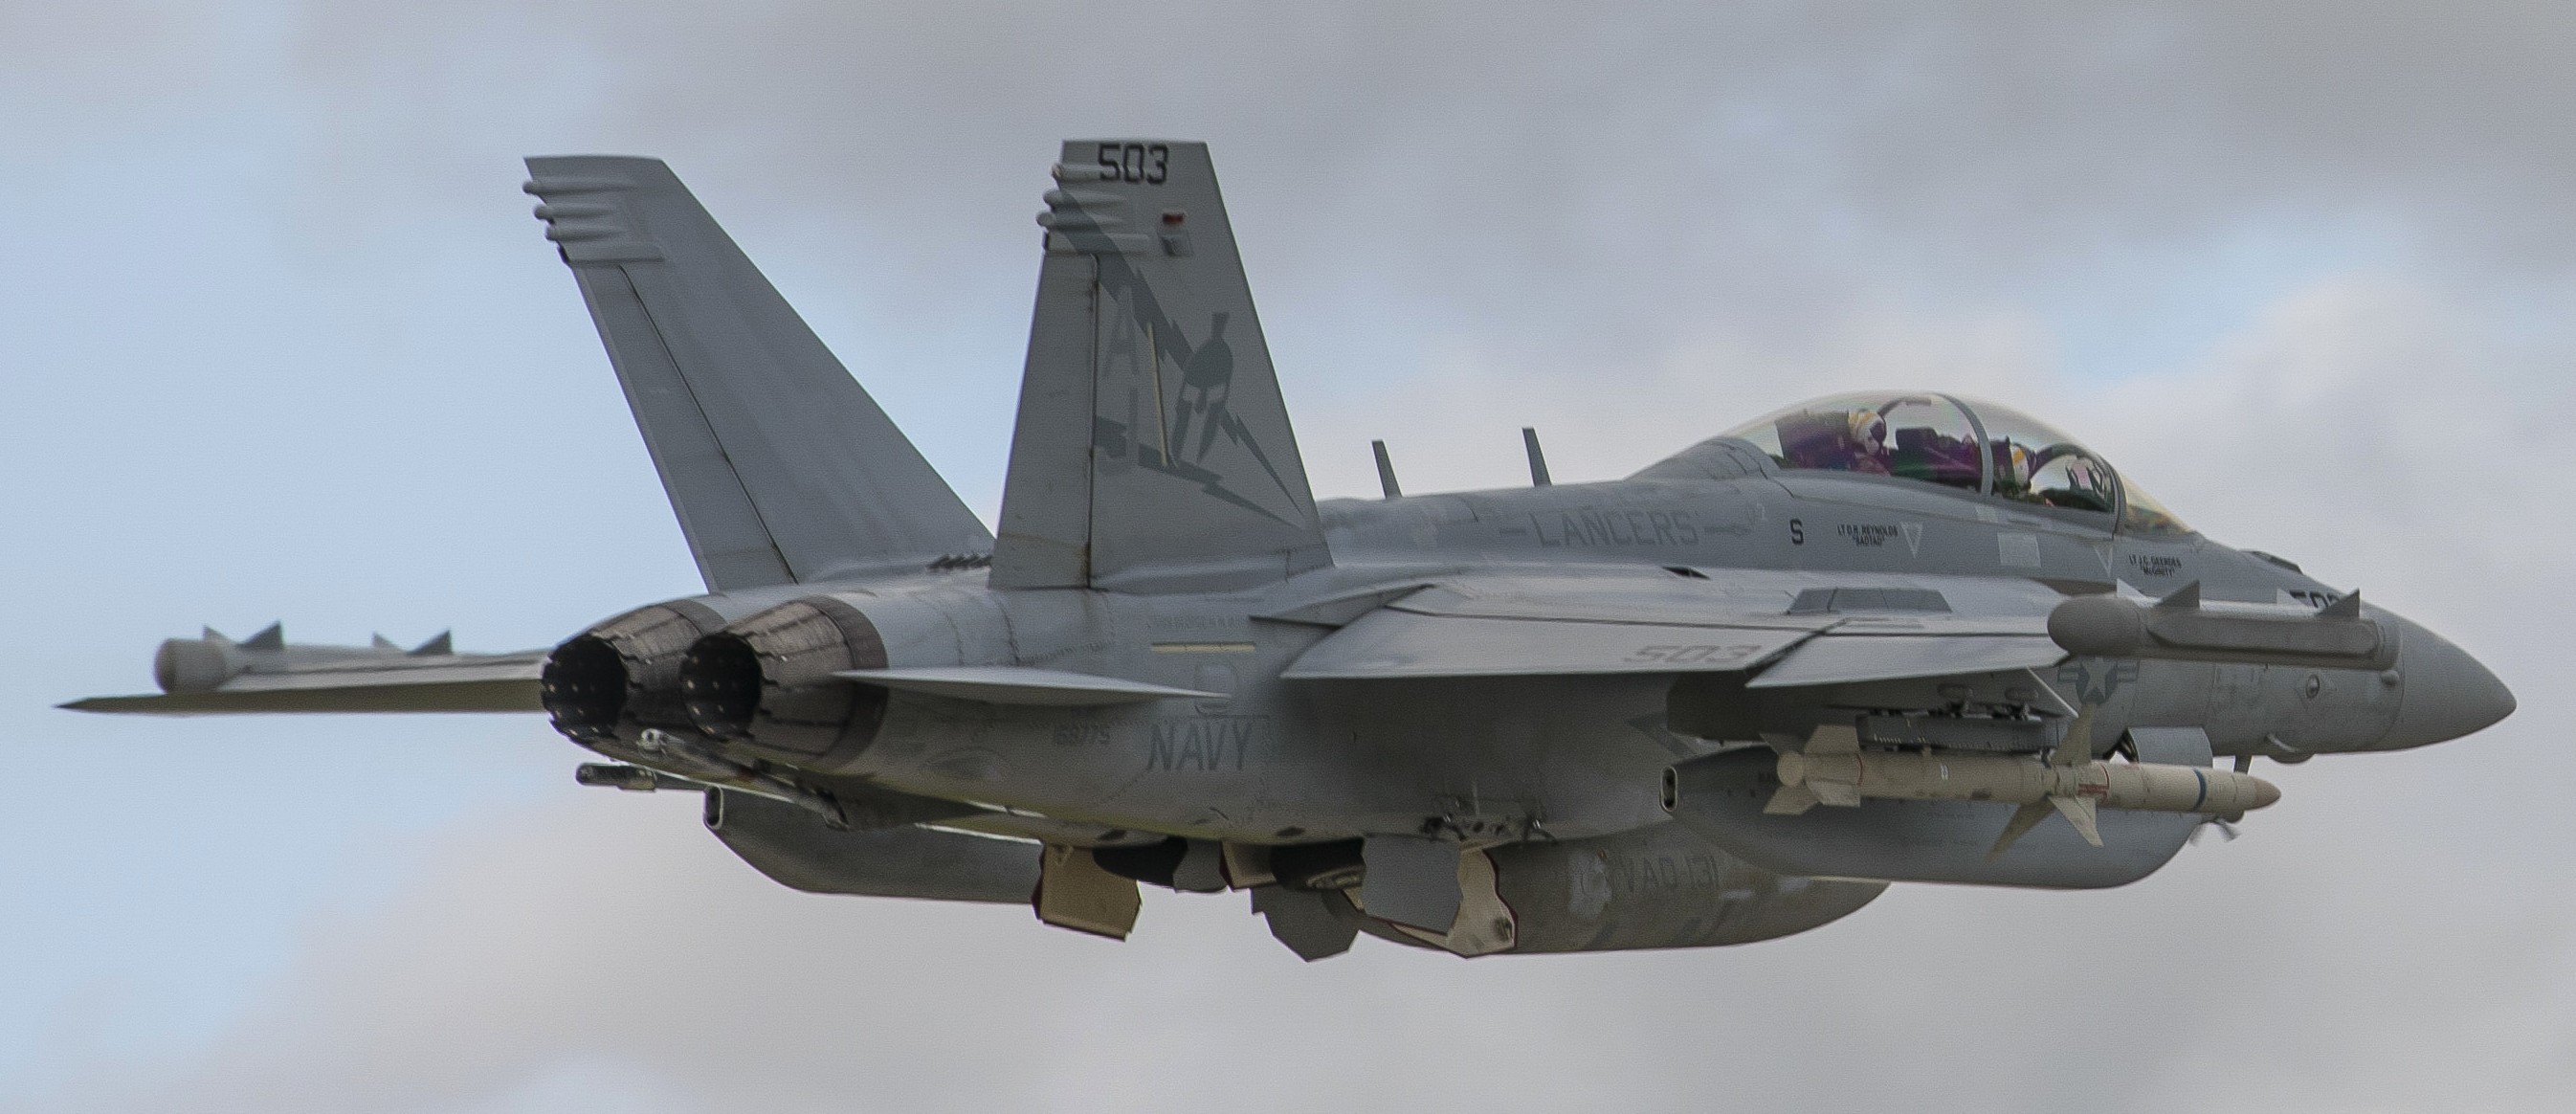 vaq-131 lancers electronic attack squadron vaqron us navy boeing ea-18g growler eielson afb alaska red flag exercise 93